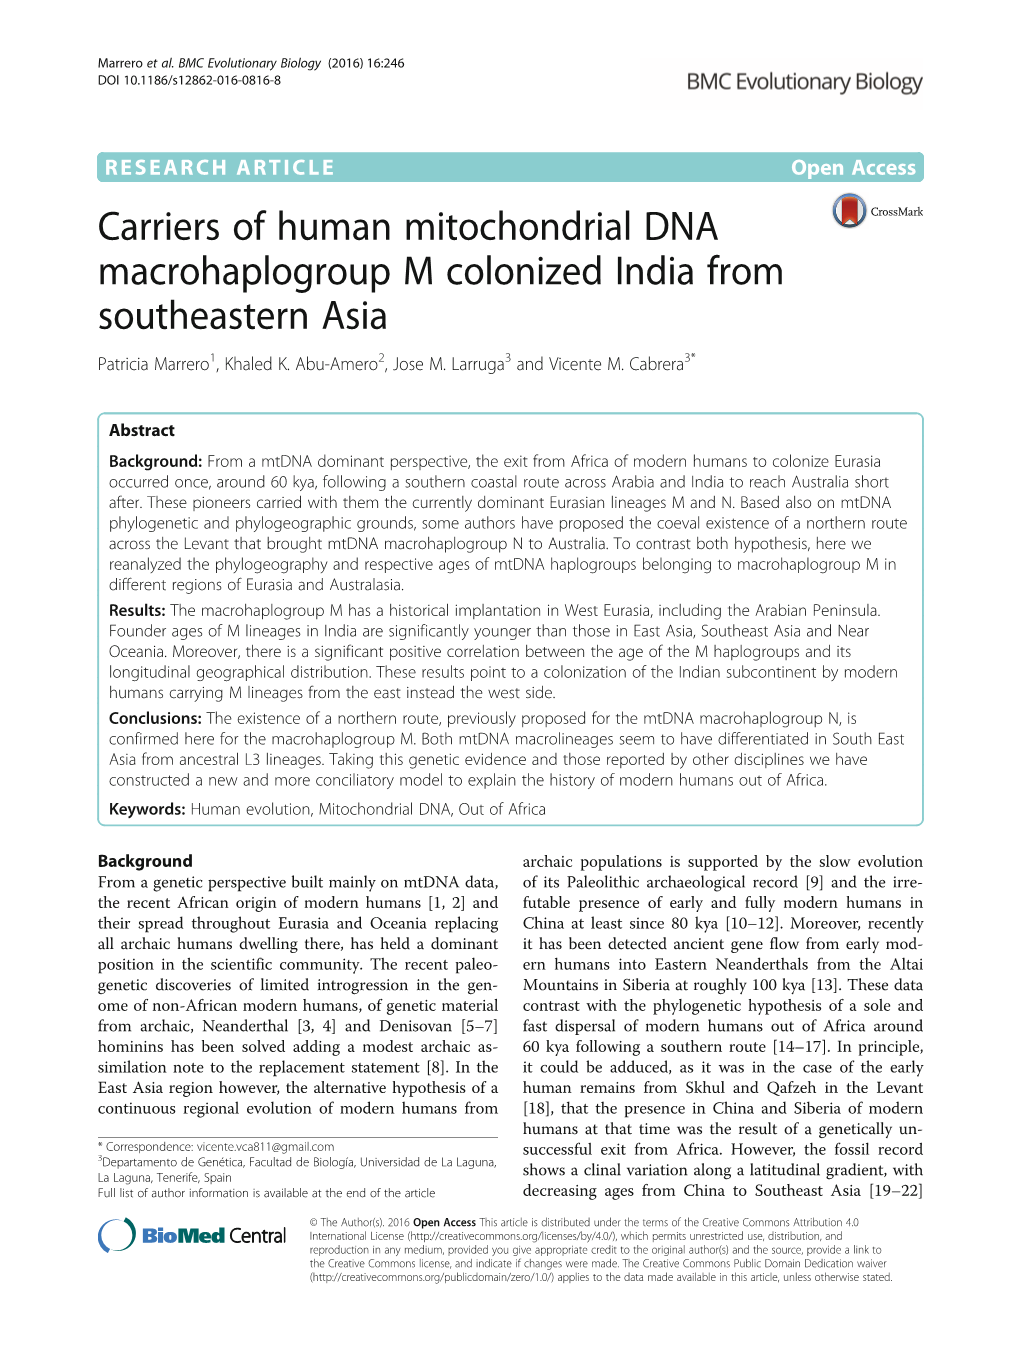 Carriers of Human Mitochondrial DNA Macrohaplogroup M Colonized India from Southeastern Asia Patricia Marrero1, Khaled K